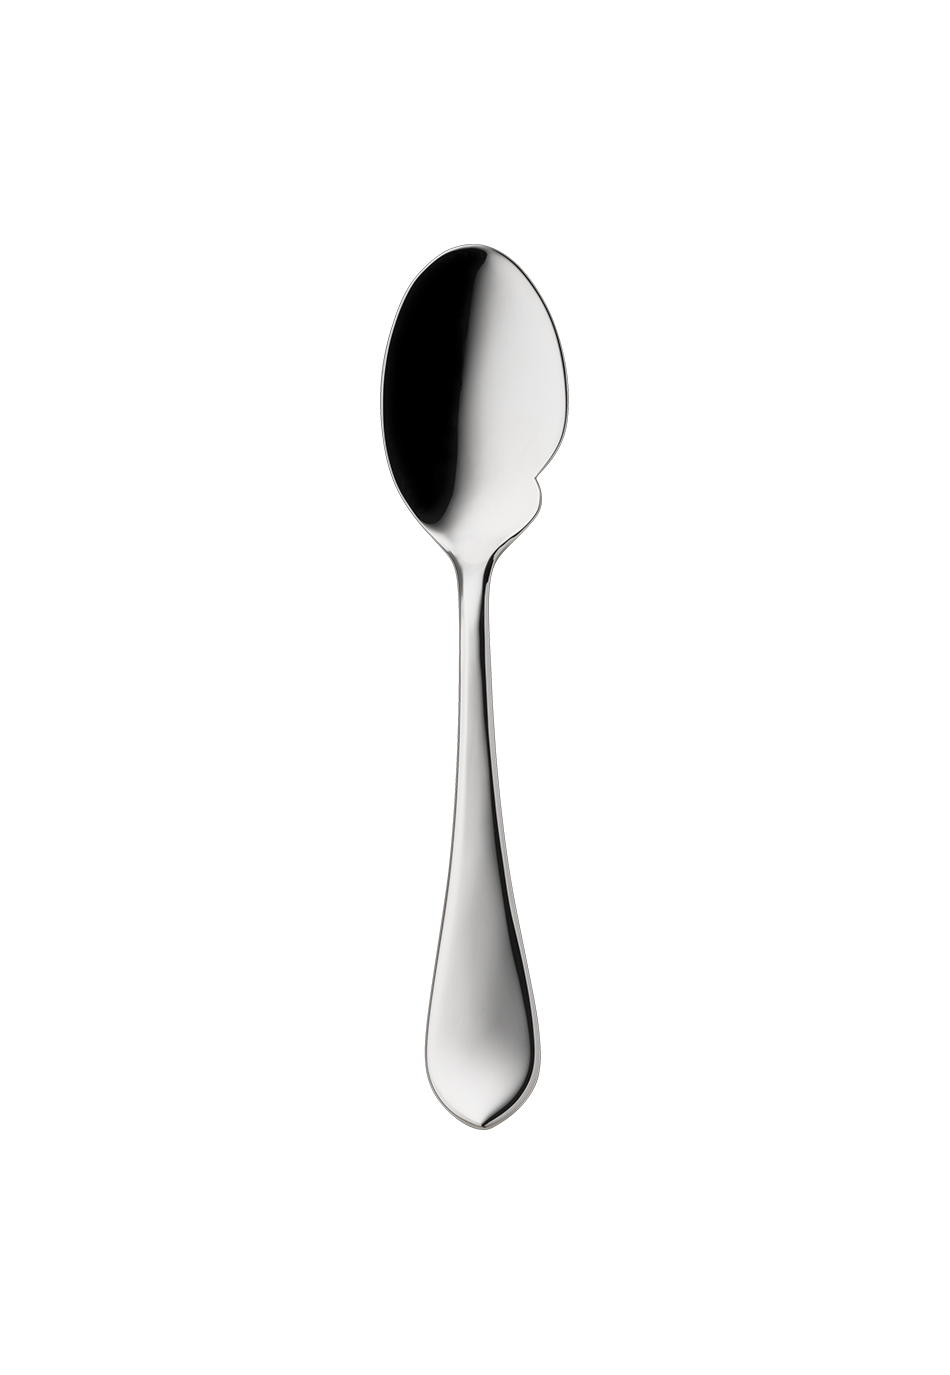 Eclipse Gourmet Spoon (150g massive silverplated)